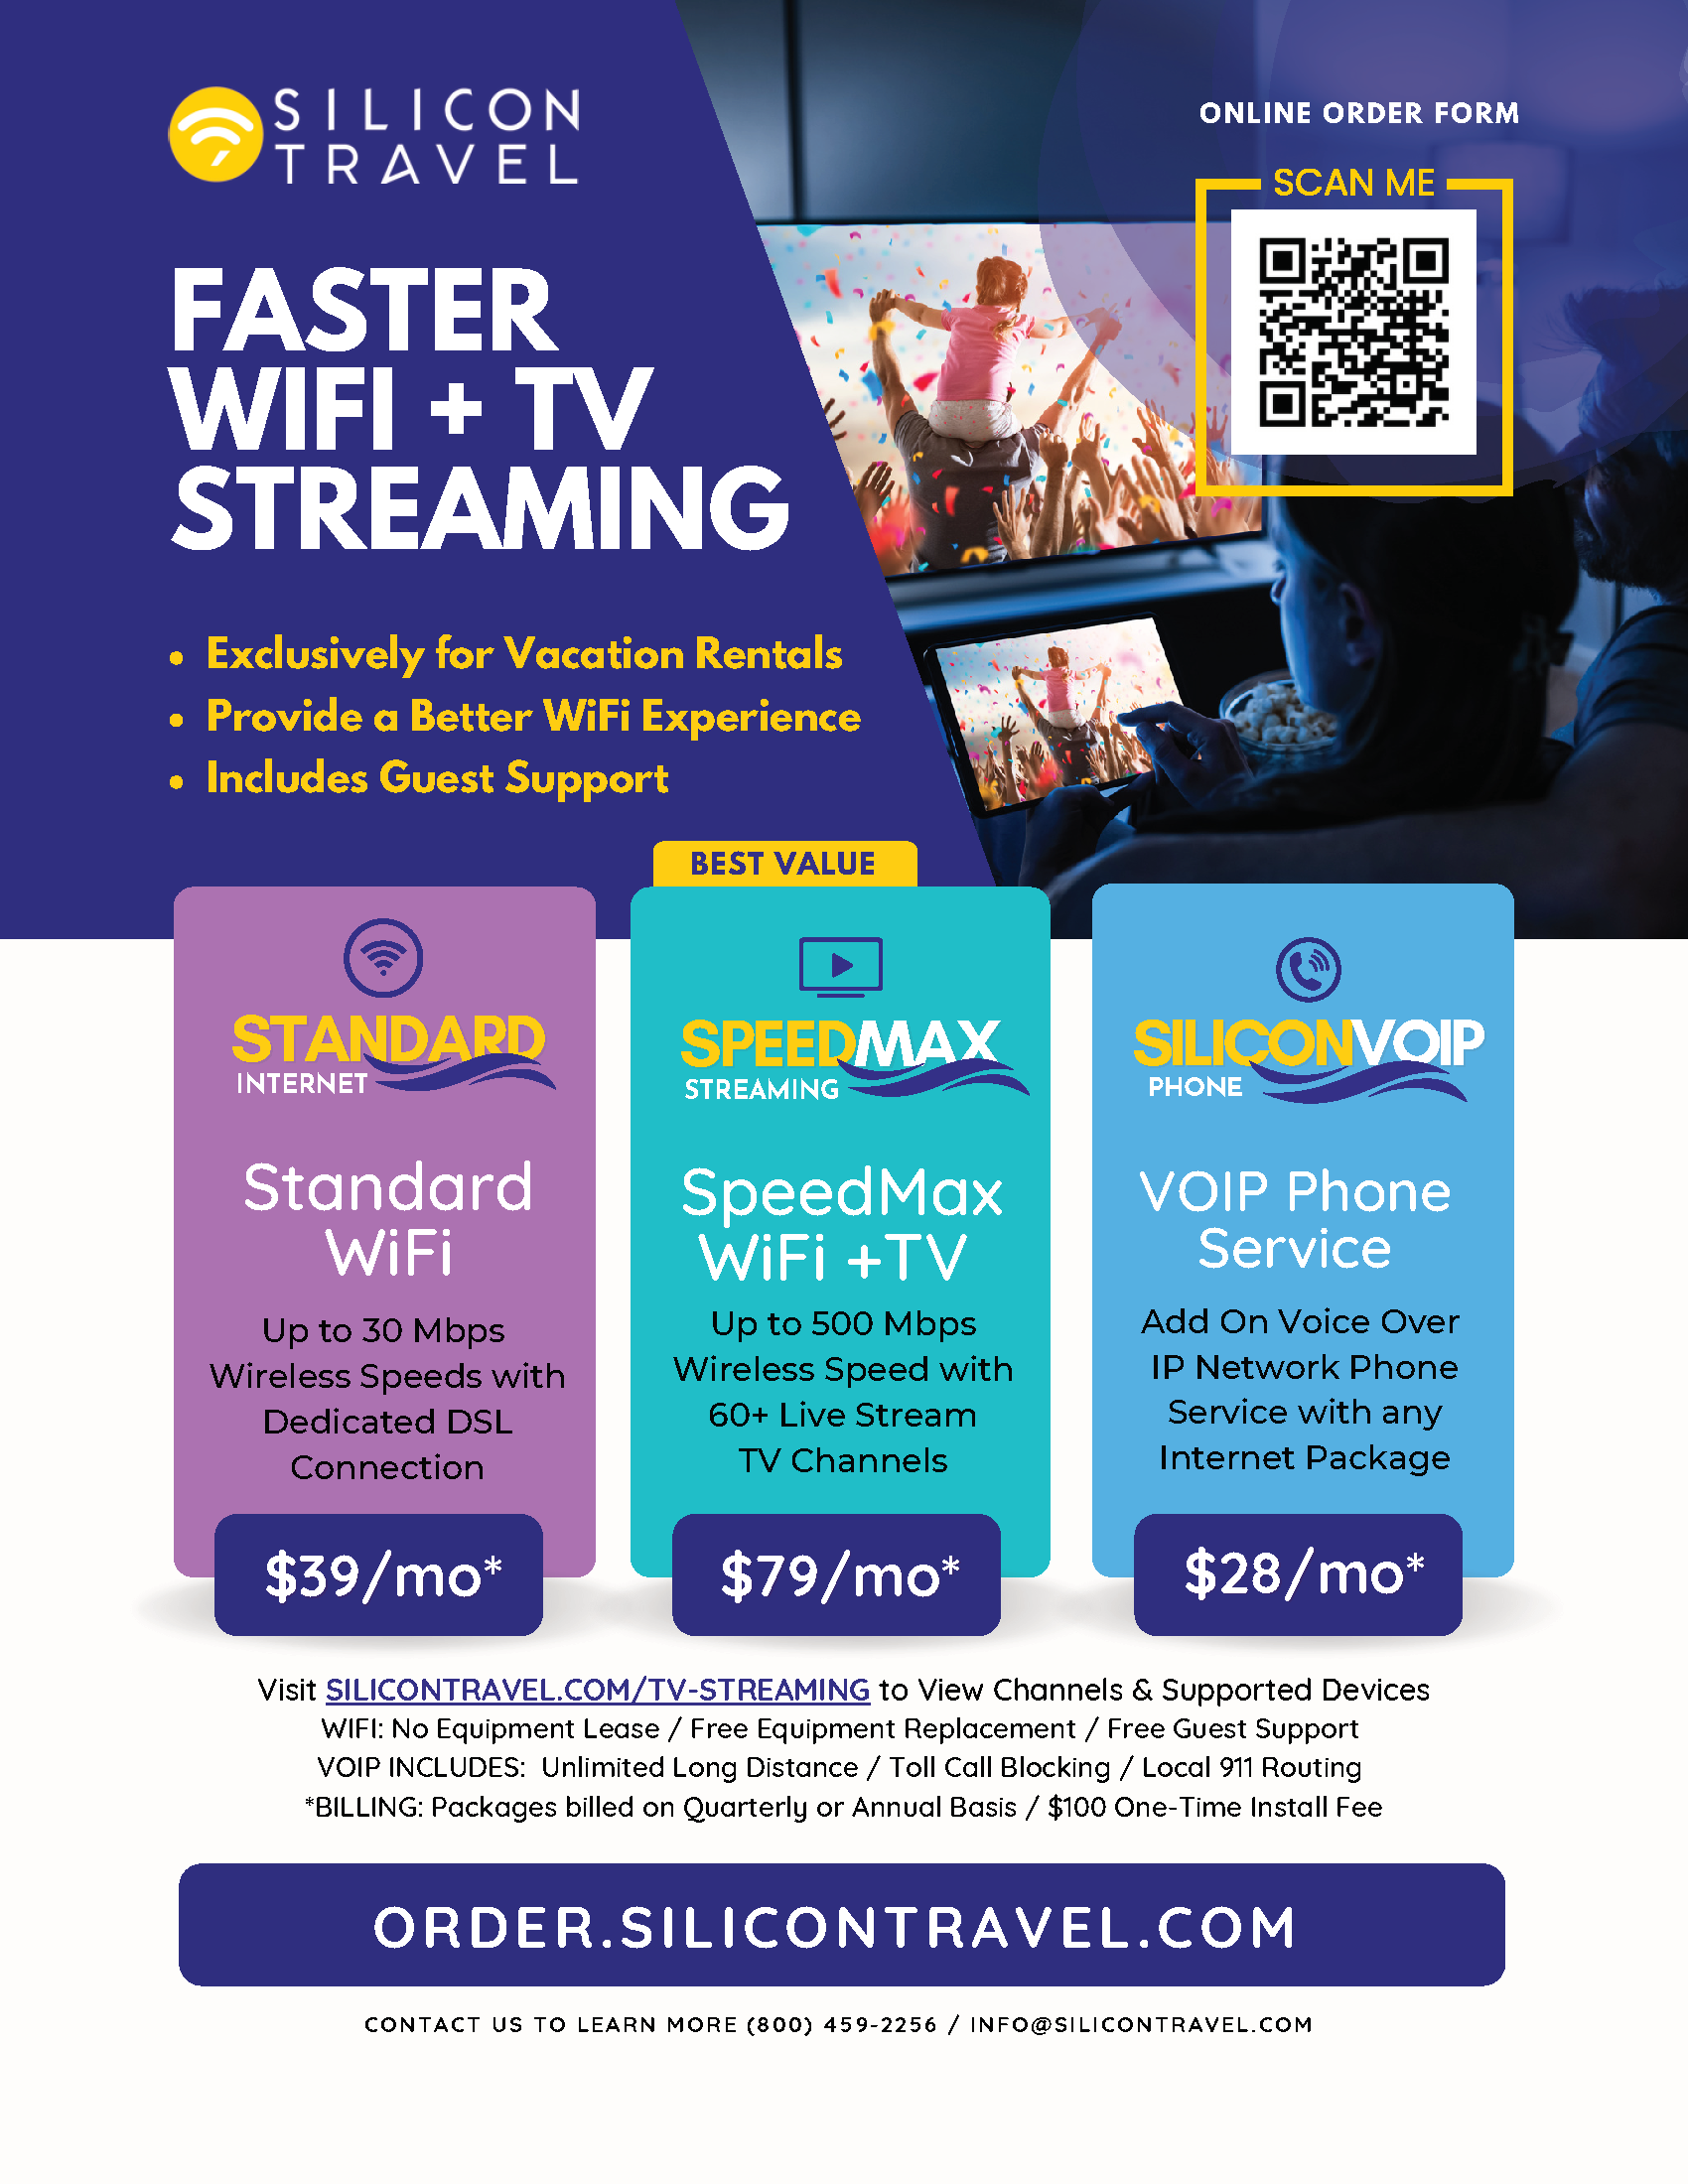 Silicon Travel Faster Wifi + TV Streaming